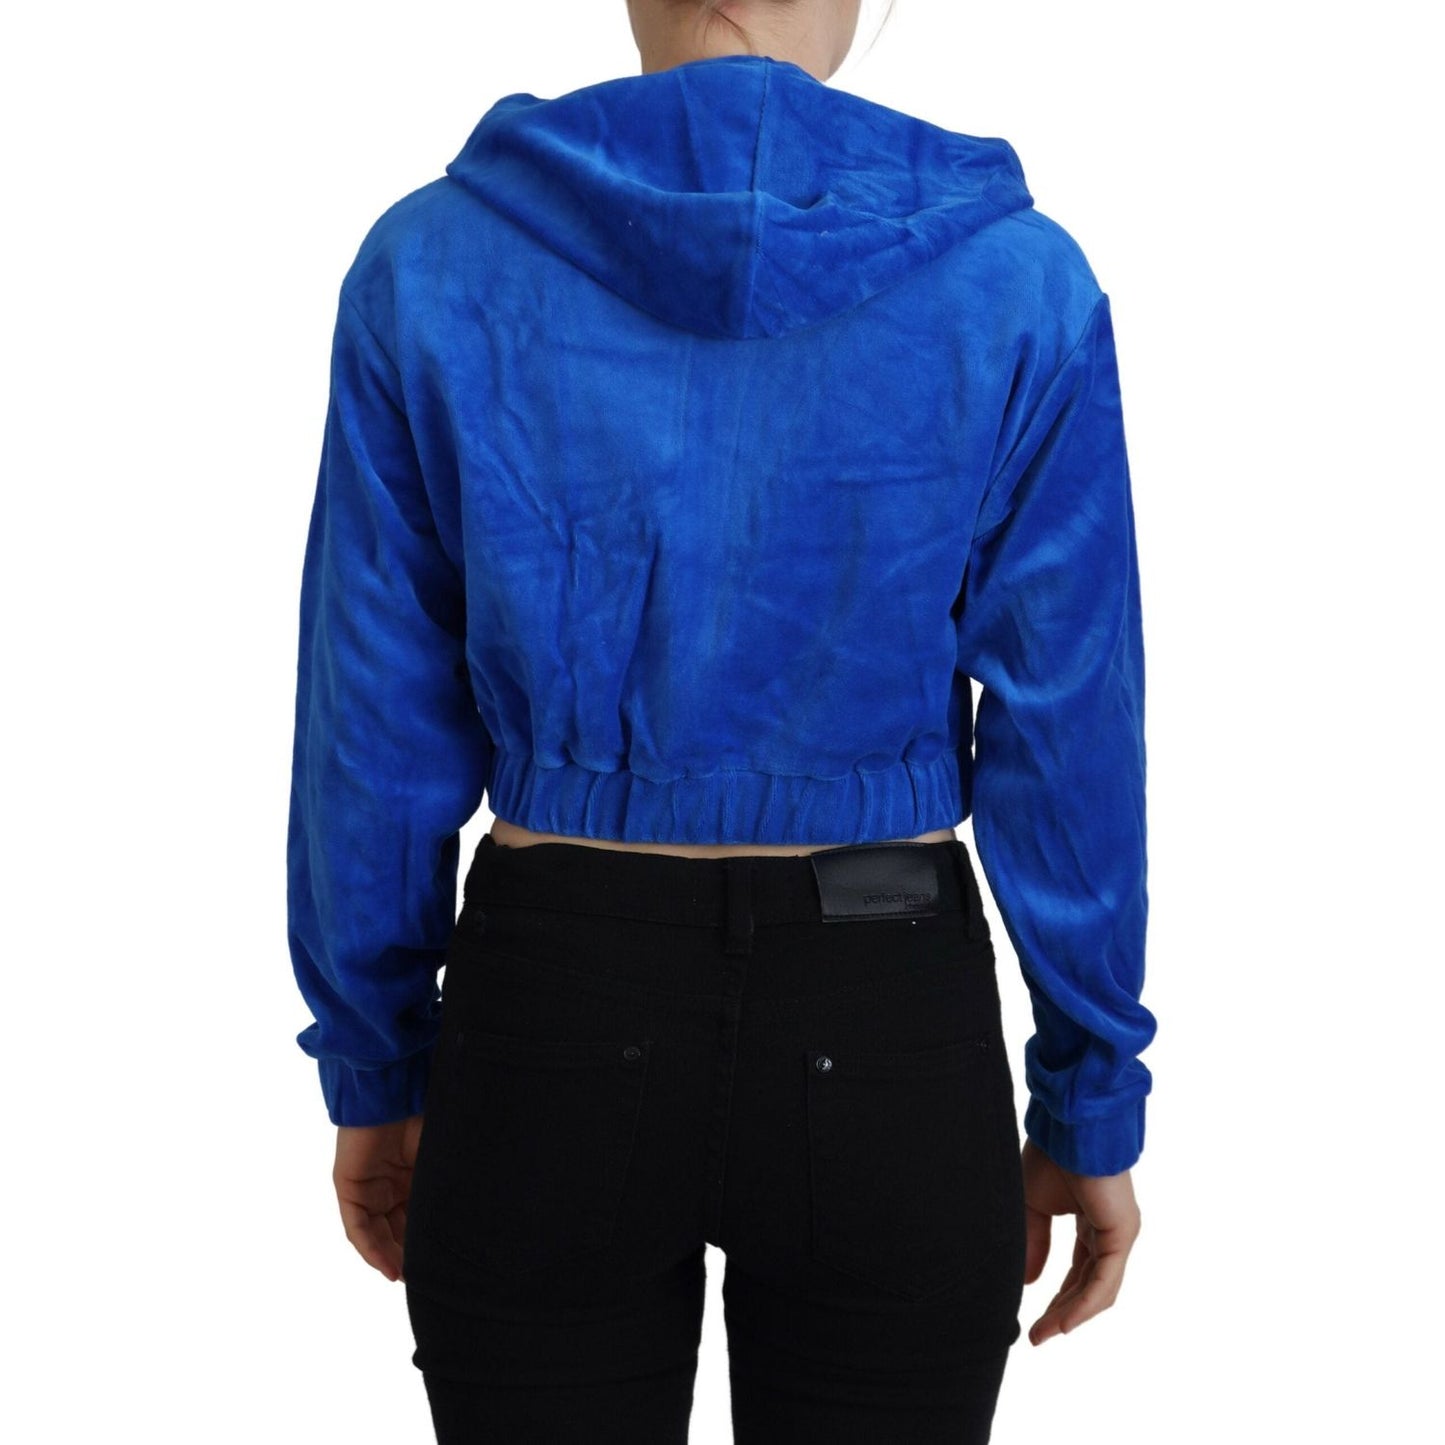 Juicy Couture Glam Hooded Zip Cropped Sweater in Blue blue-cotton-full-zip-cropped-hooded-sweatshirt-sweater